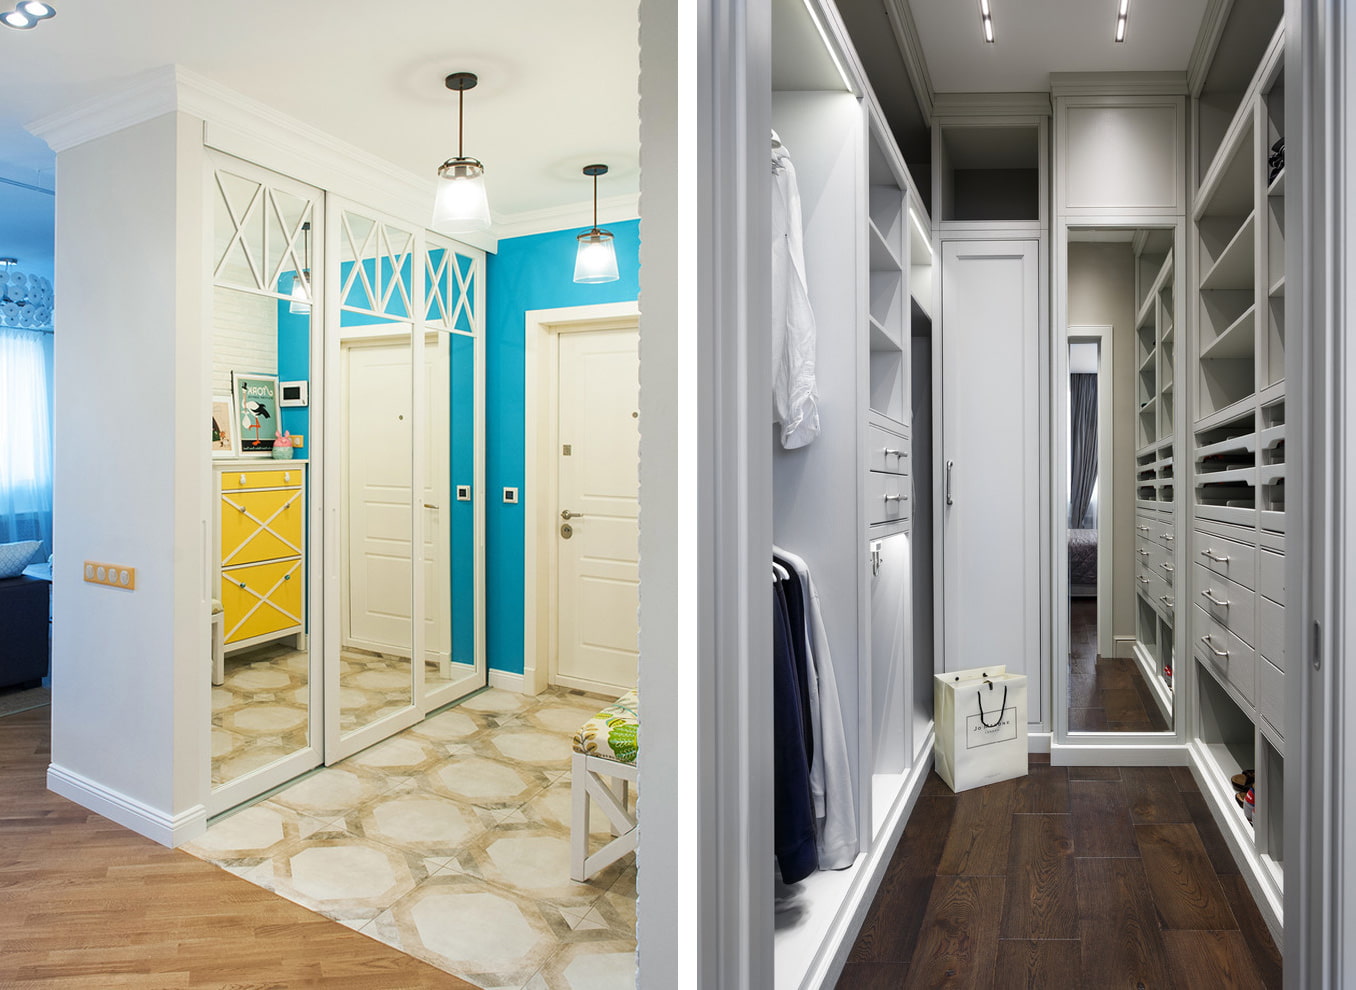 Which is better: a wardrobe or a dressing room?